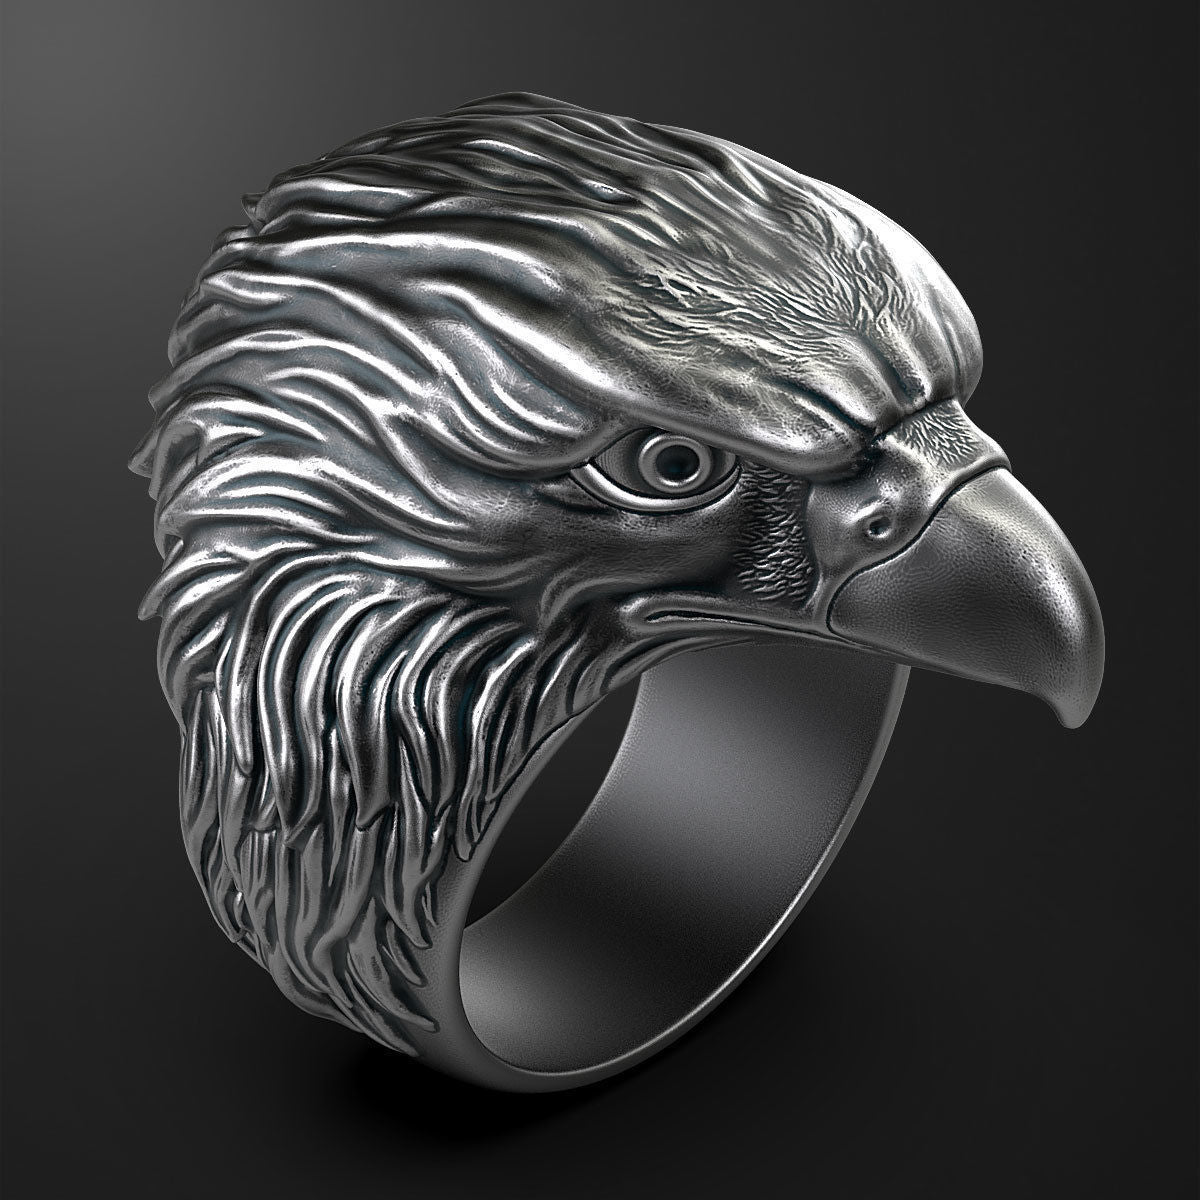 Men's Silver Ring Design | Round Shape With Liberty Eagle Ring |